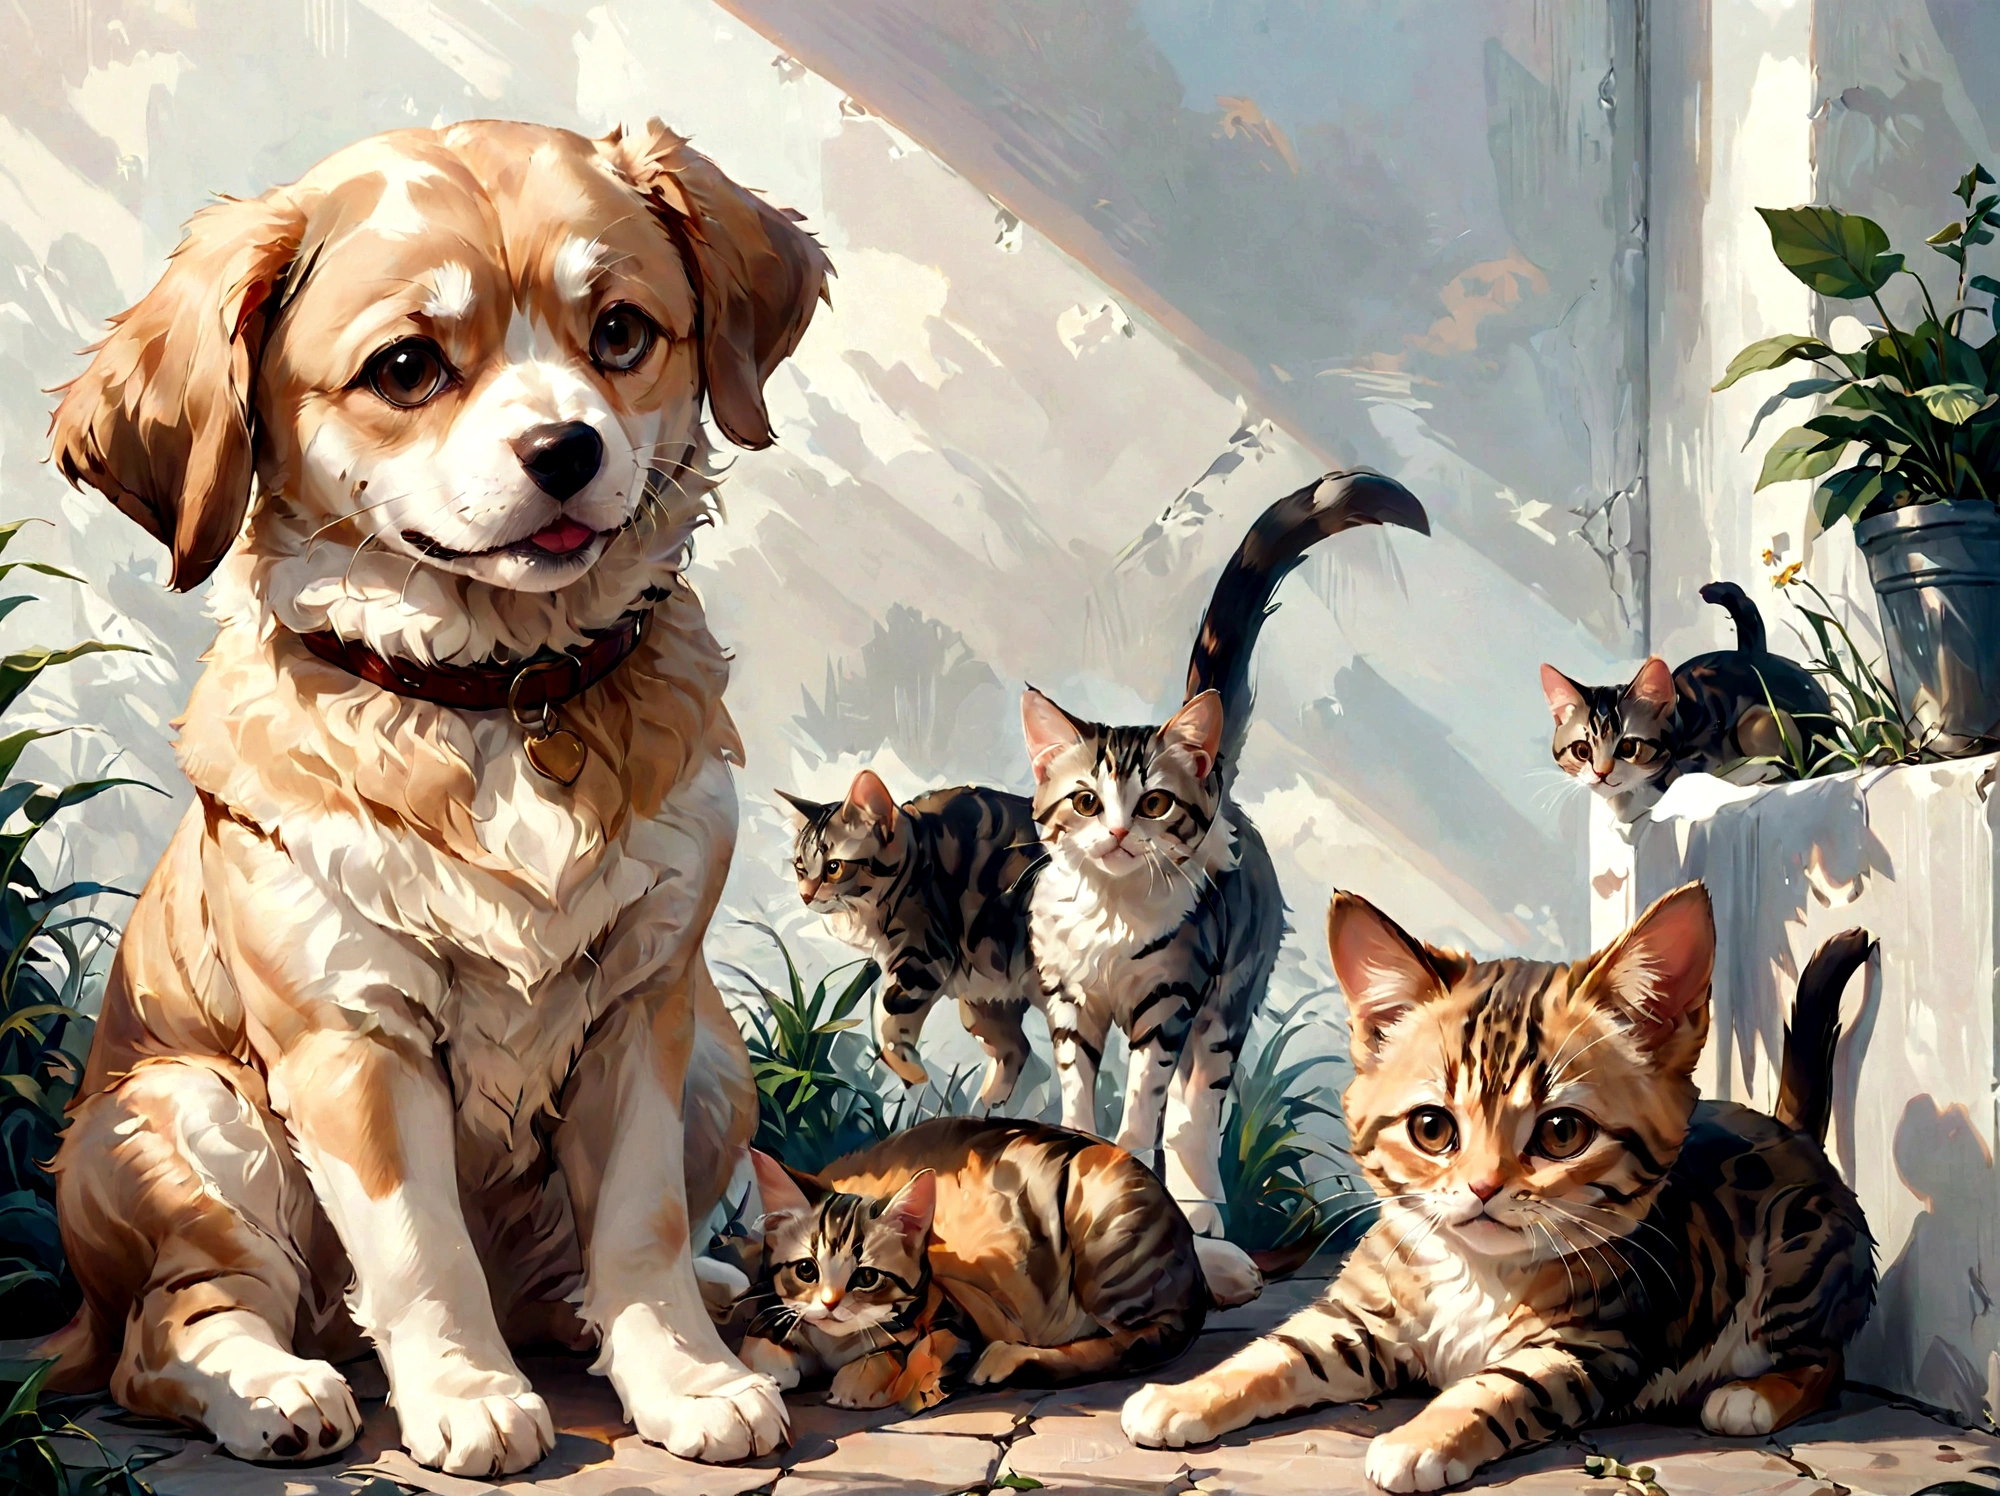 "A realistic painting of a dog and a cat in the exact same positions as in the provided photo. The dog is on the left, facing forward with a slightly tilted head, light brown fur, and a happy expression. The cat is on the right, laying down, with dark tabby fur and large eyes, also facing forward. The background should be a plain wall, just like in the photo. The overall composition and details should closely match the original photo."

